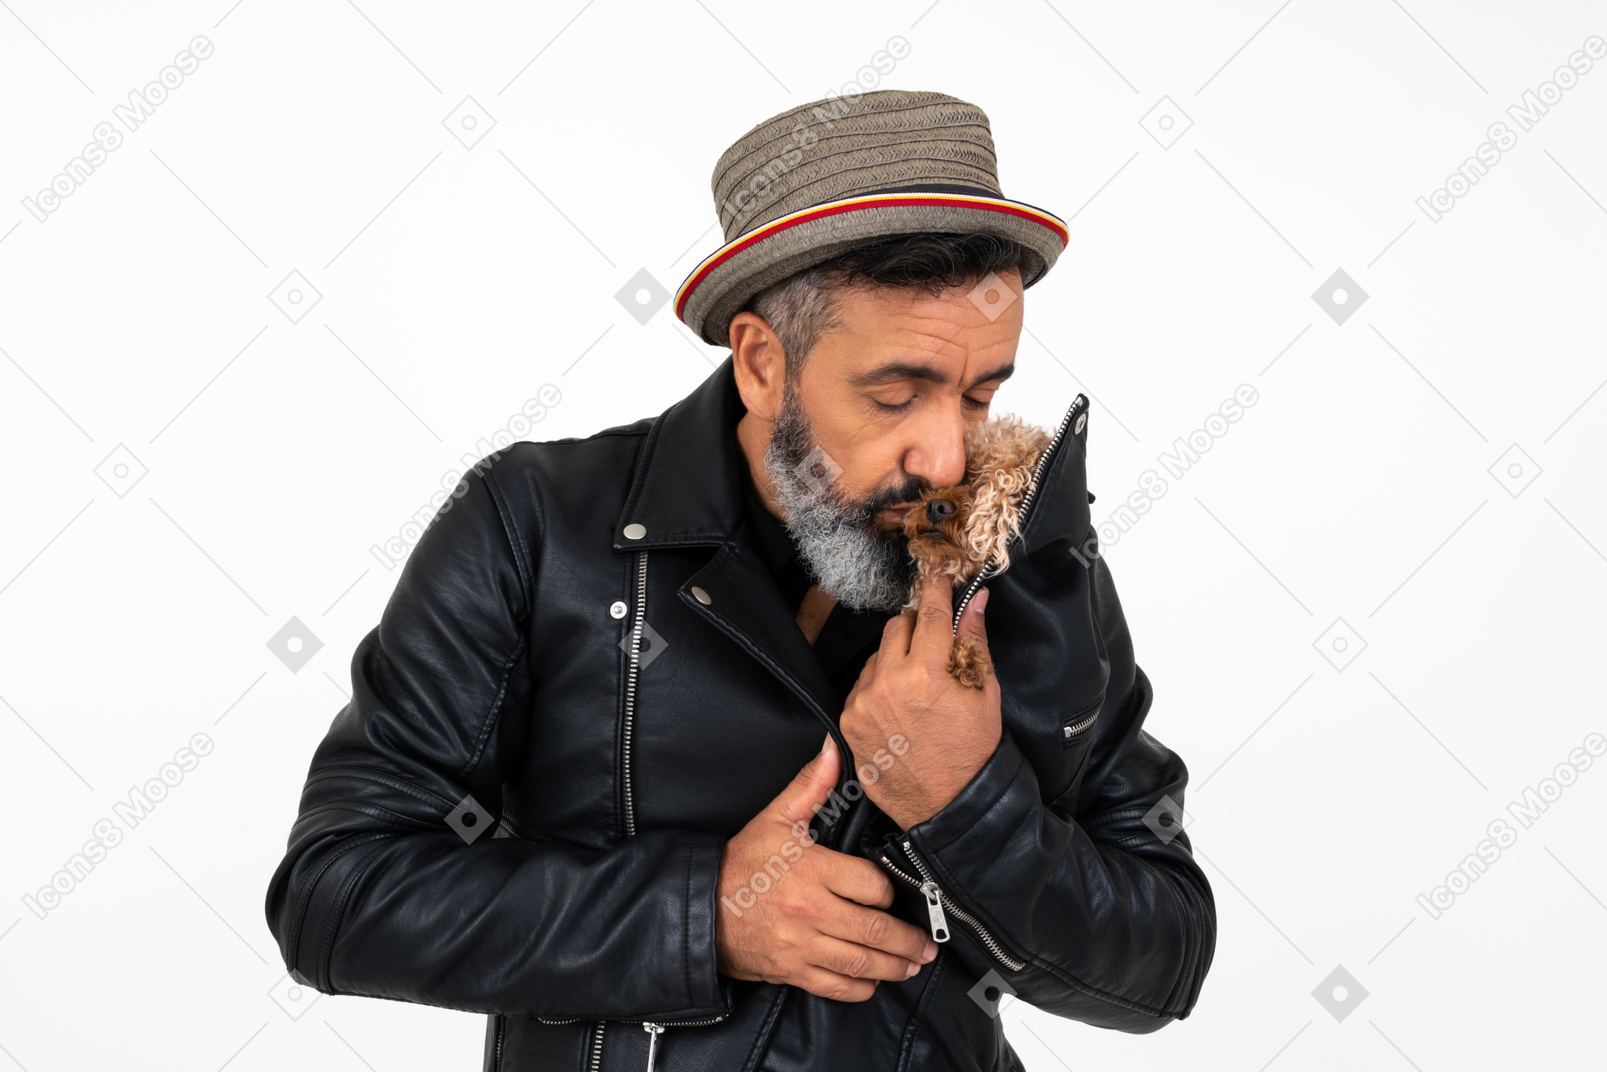 Man kissing a puppy which he's holding under the jacket